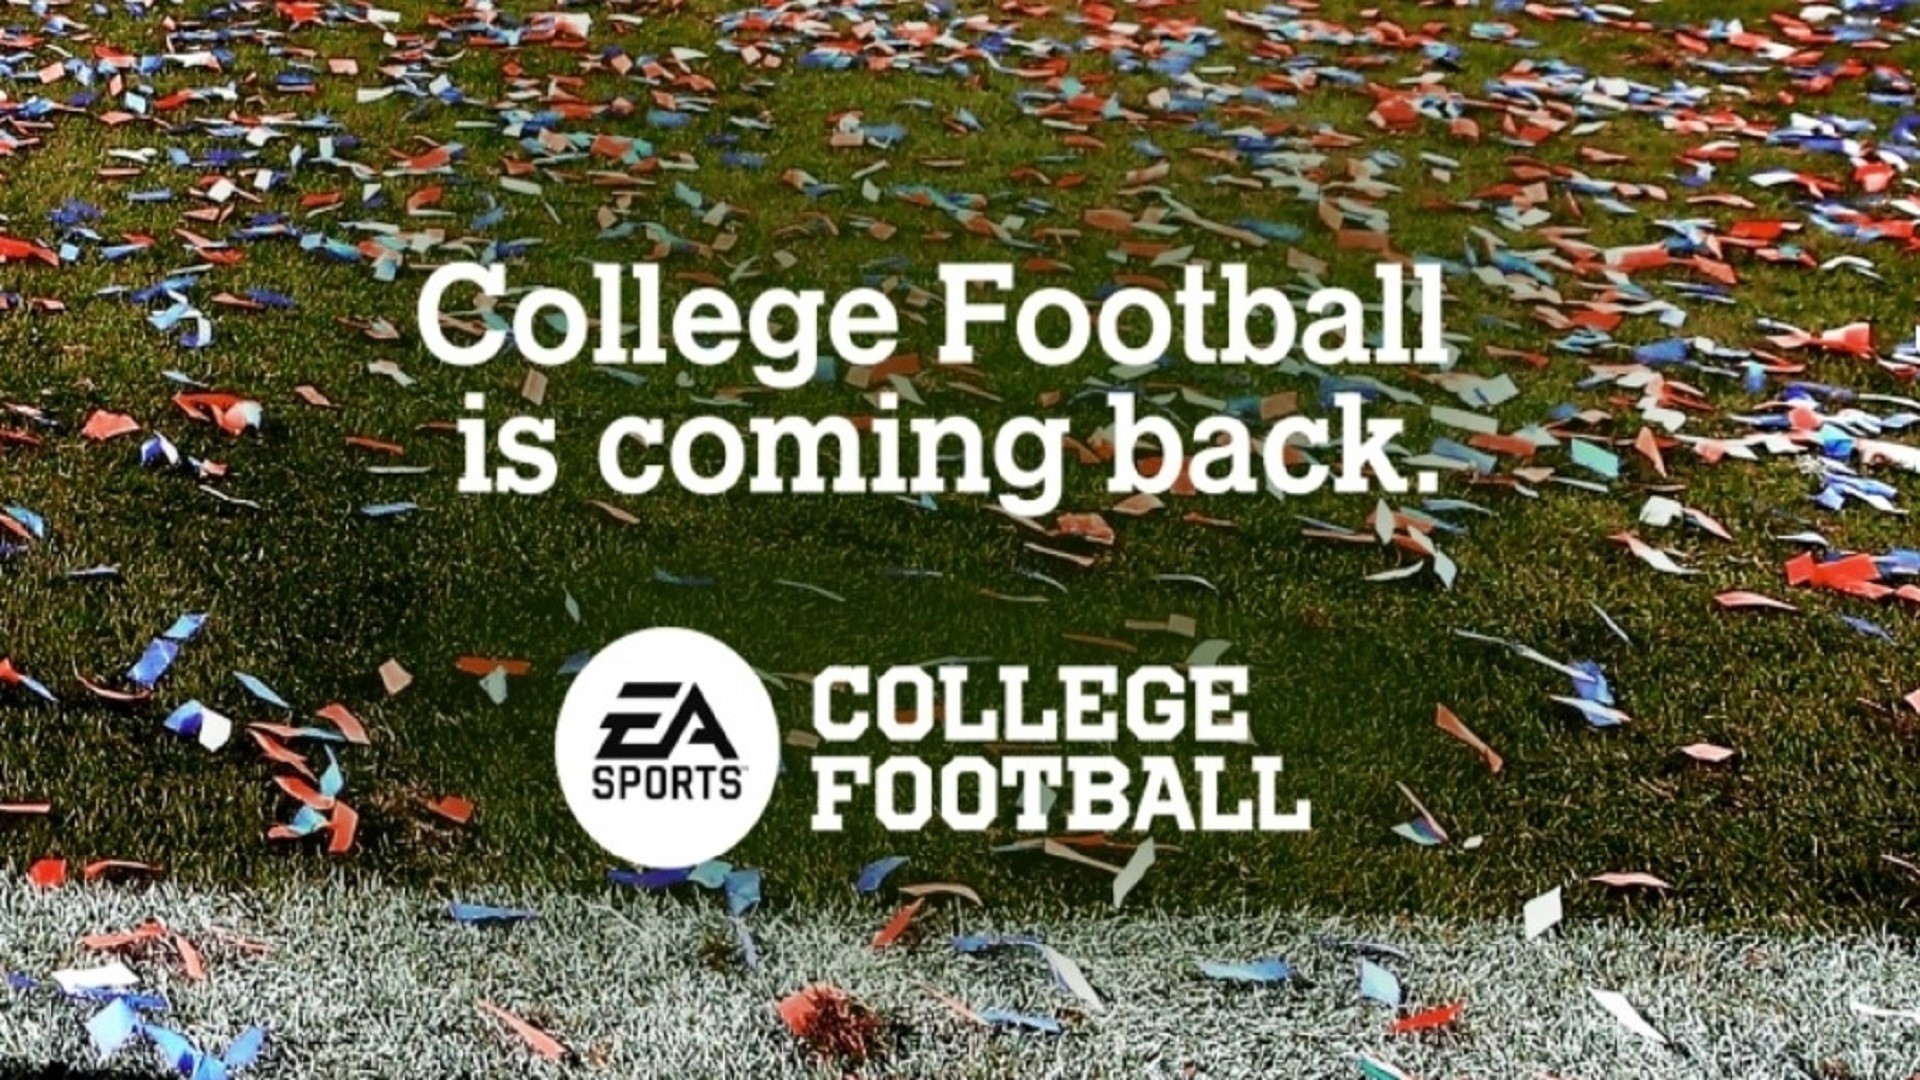 College football players will benefit financially from the use of their likenesses when EA Sports brings back its college football game for the first time since 2013